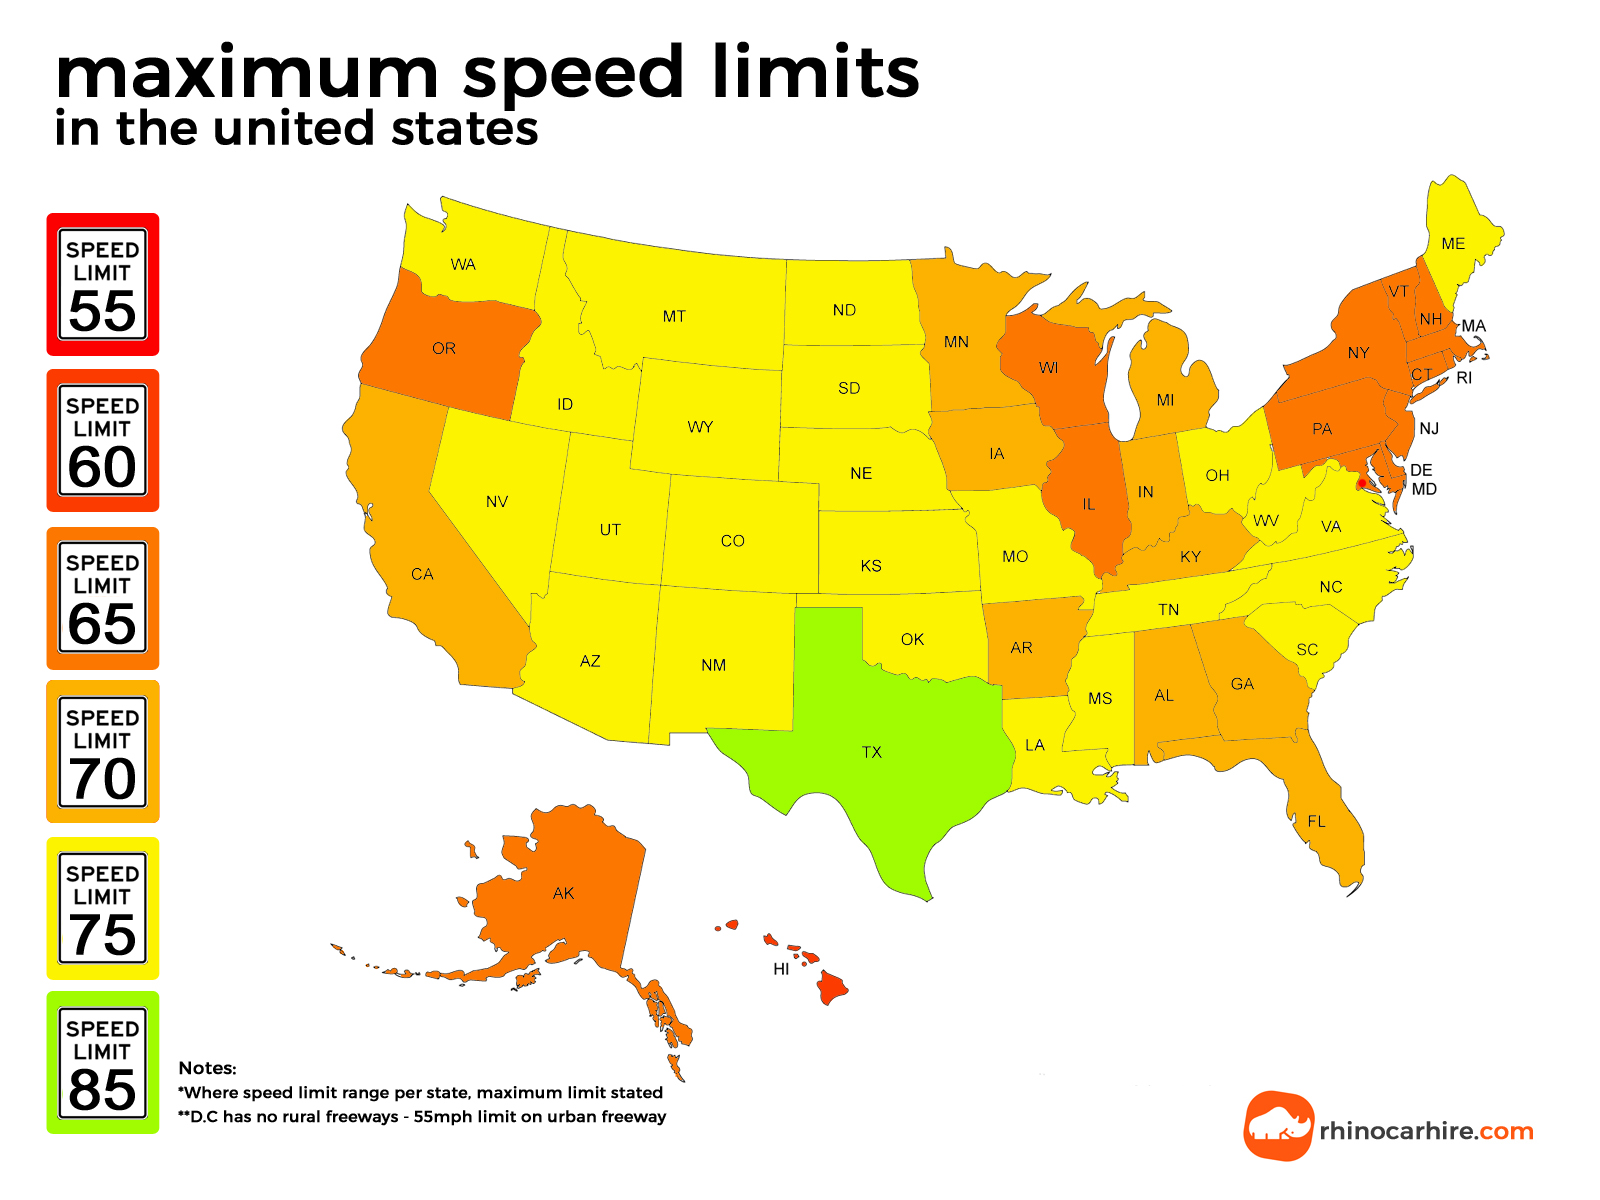 What is Max speed limit in USA?